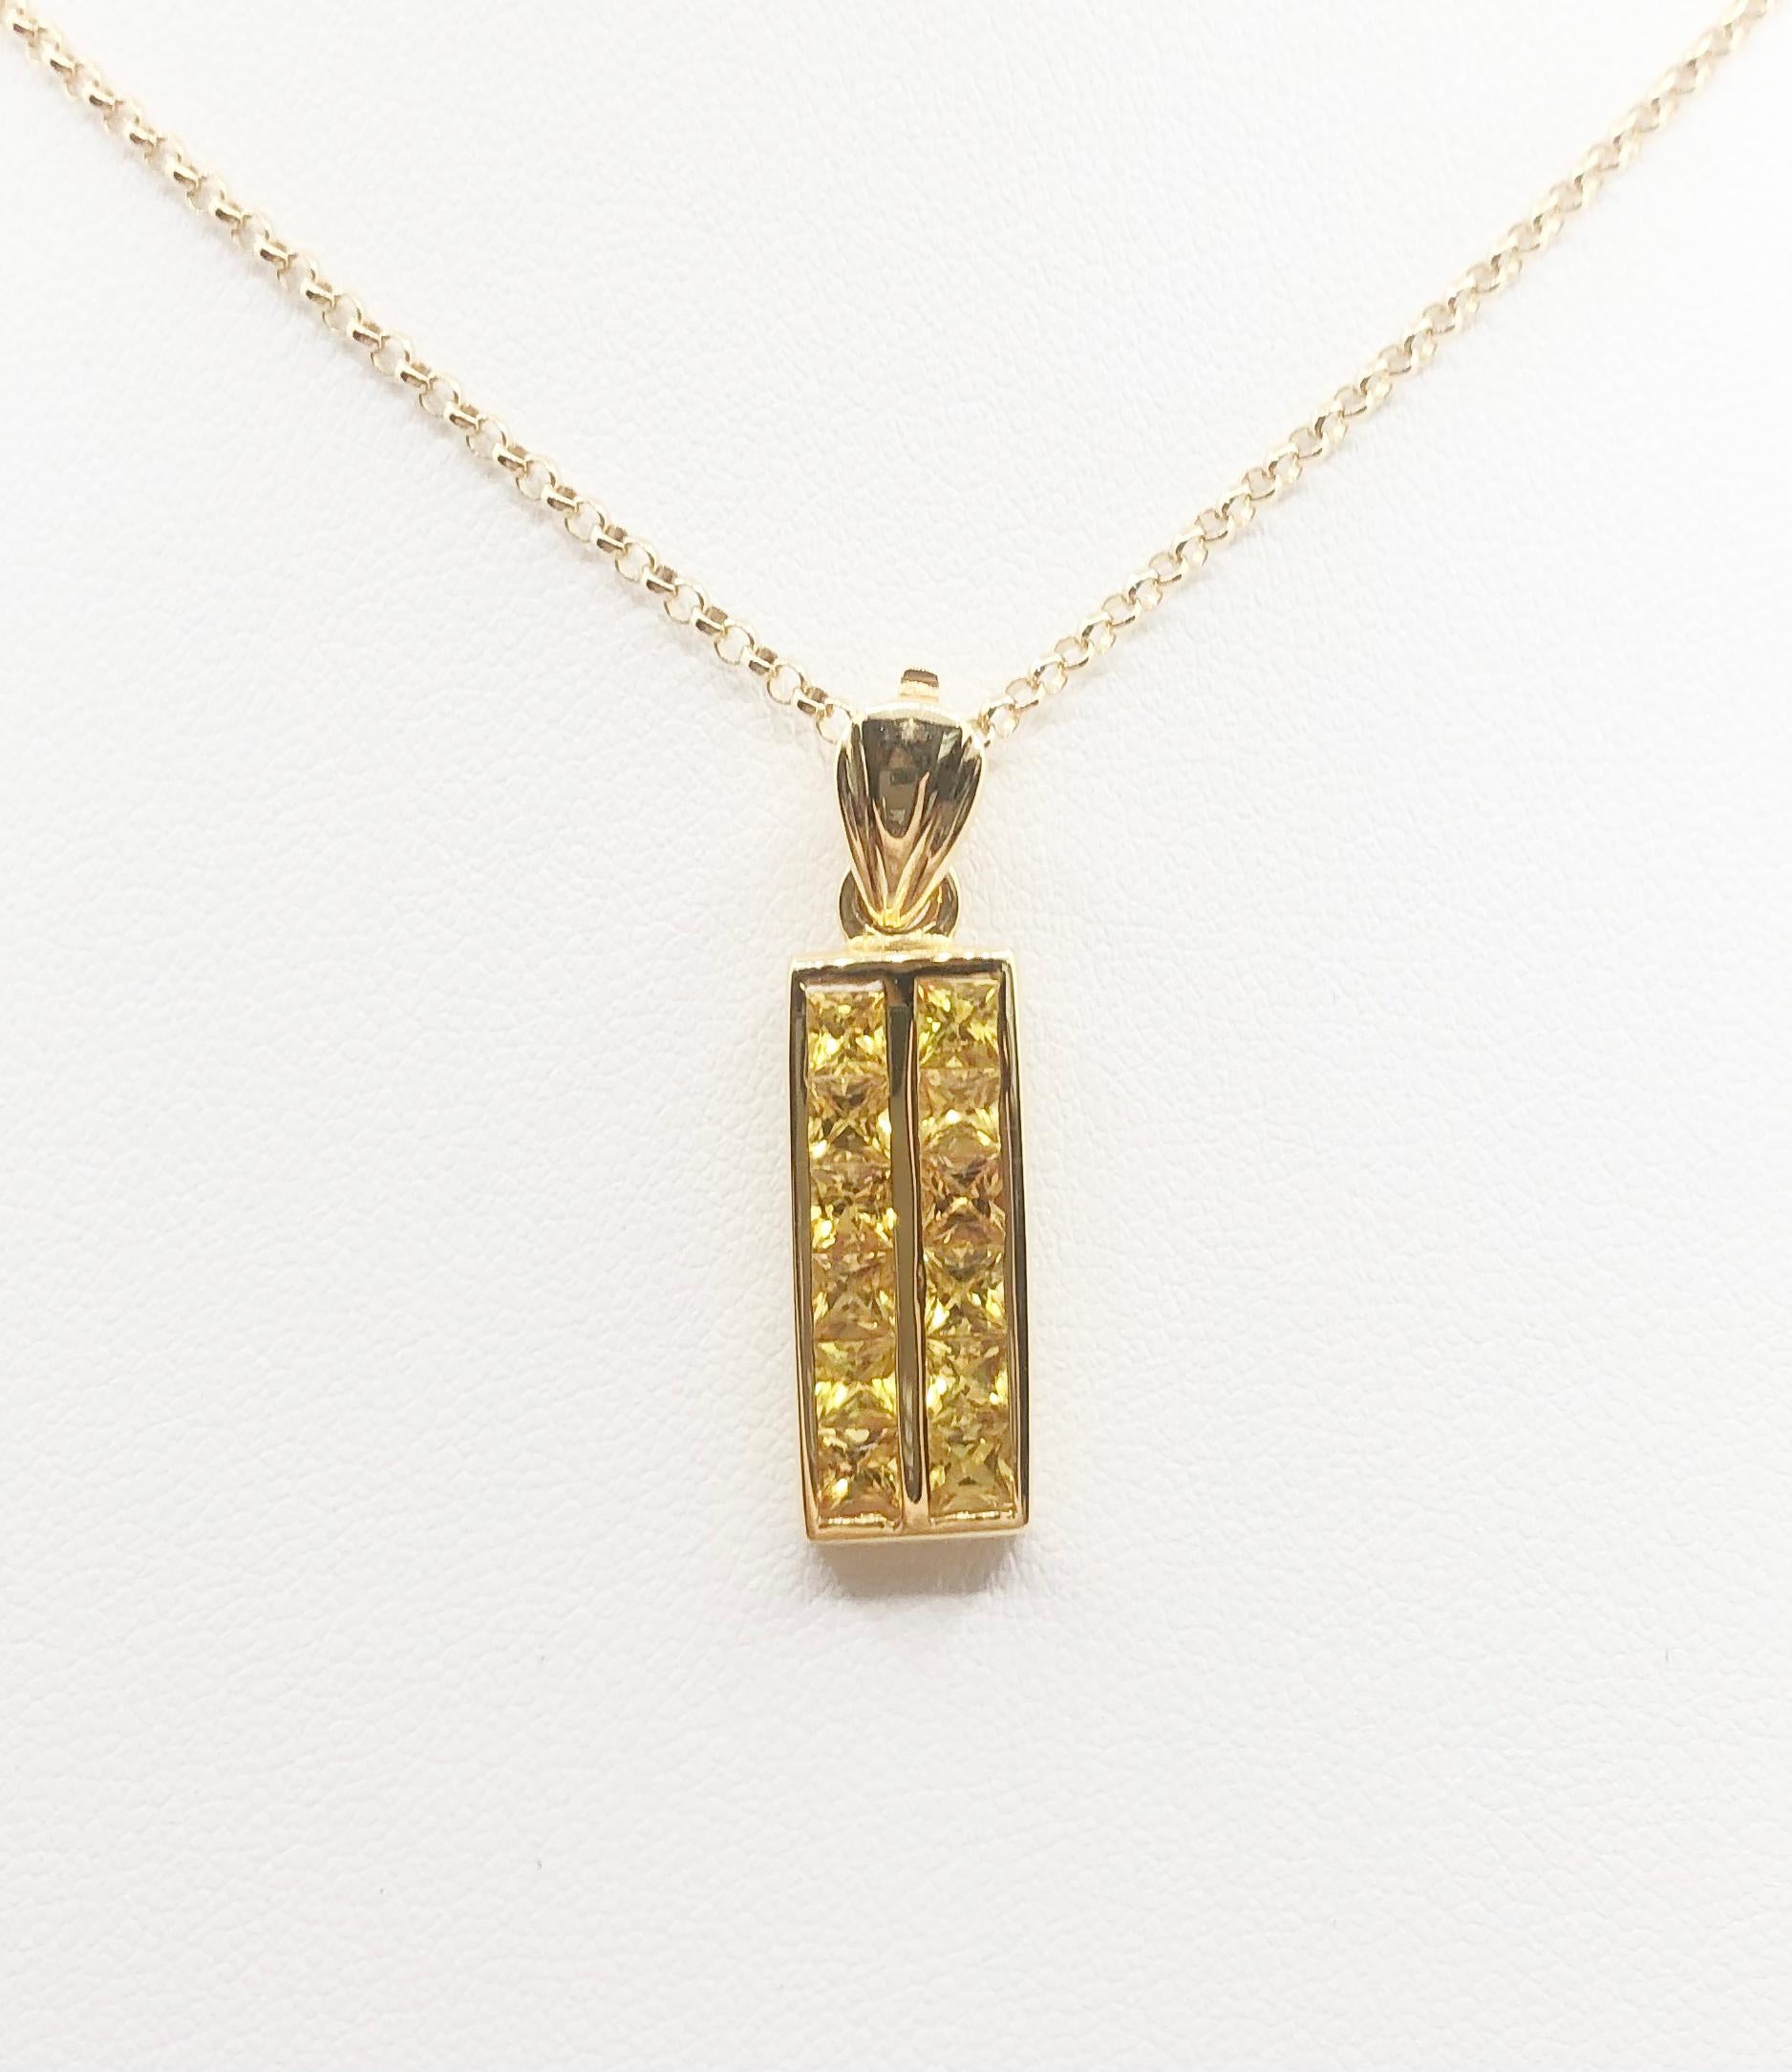 Yellow Sapphire 2.37 carats Pendant set in 18 Karat Gold Settings
(chain not included)

Width: 0.8 cm 
Length: 3.0 cm
Total Weight: 4.3 grams

